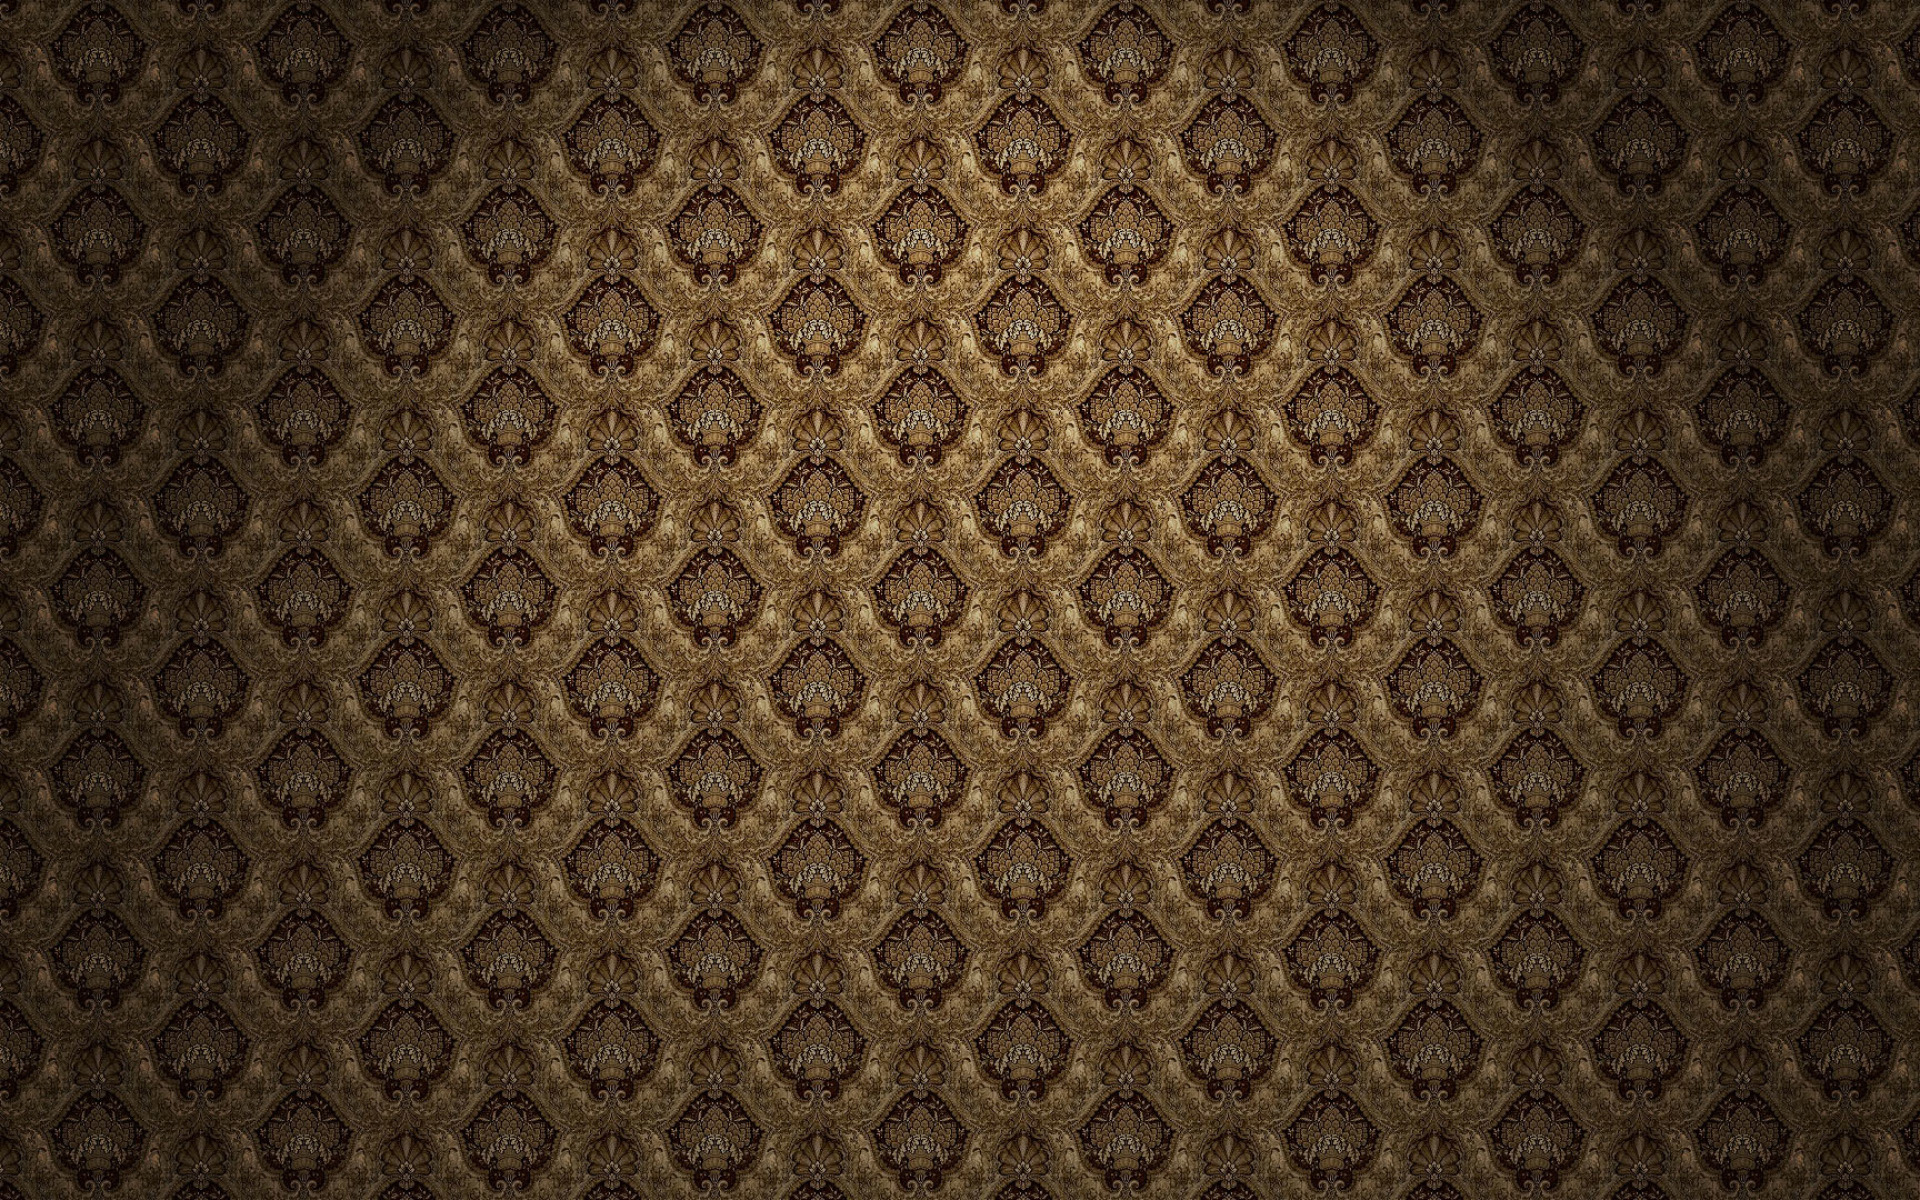 Download wallpaper brown vintage background, retro background, floral patterns, vintage background, brown retro background, vintage floral pattern, floral vintage pattern for desktop with resolution 1920x1200. High Quality HD picture wallpaper